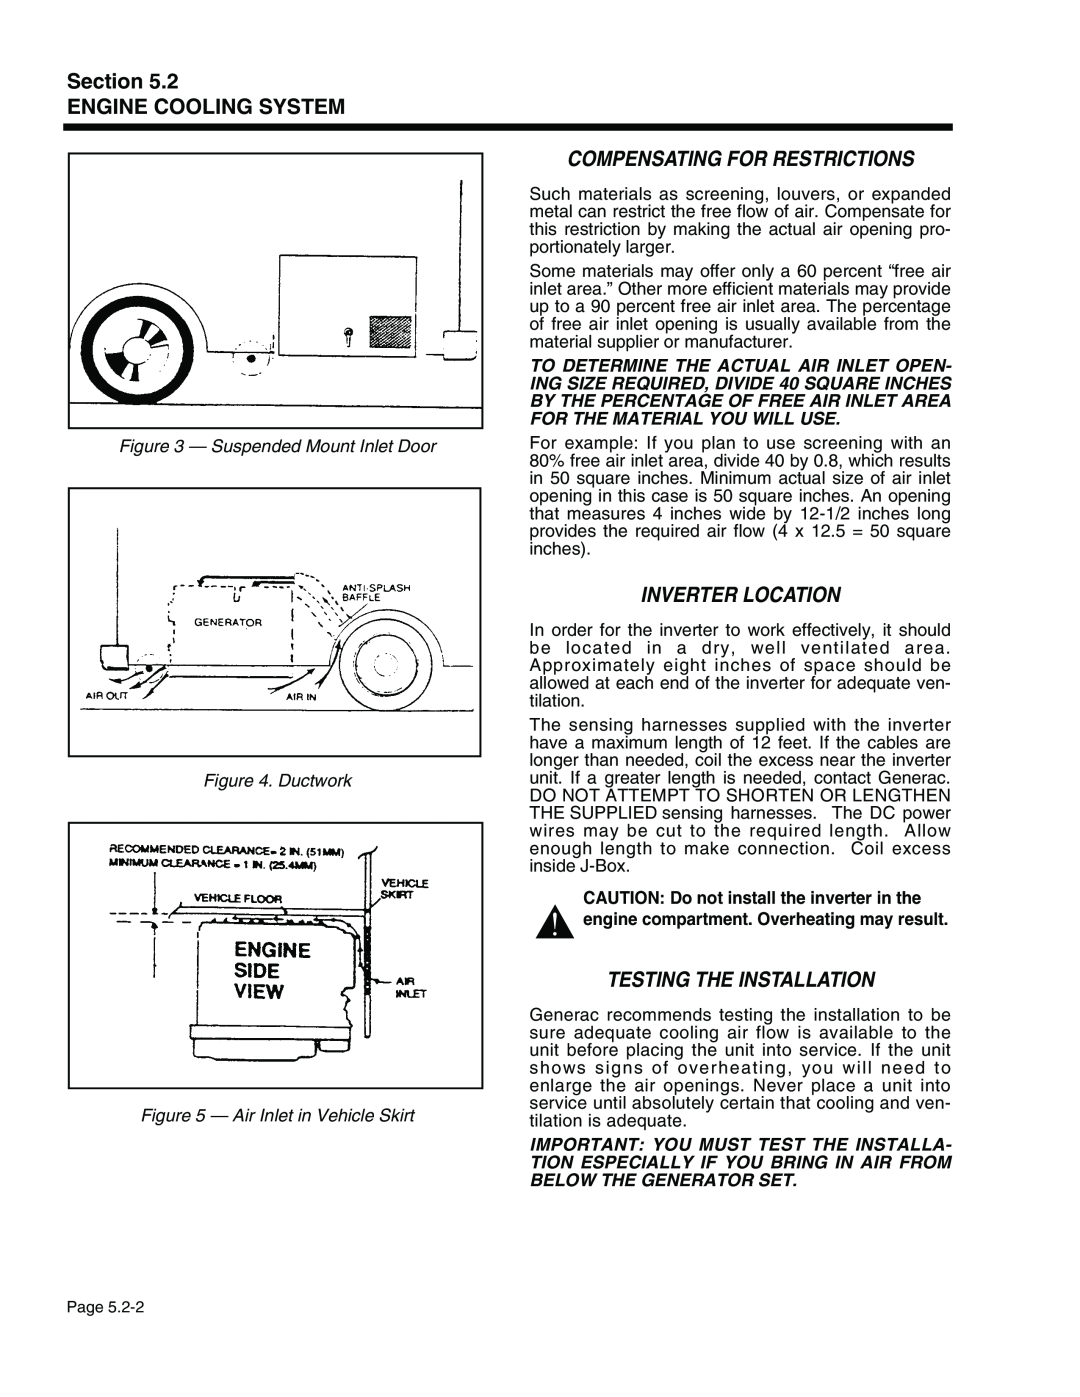 Generac Power Systems 940-2, 941-2 service manual Compensating For Restrictions, Inverter Location, Testing The Installation 